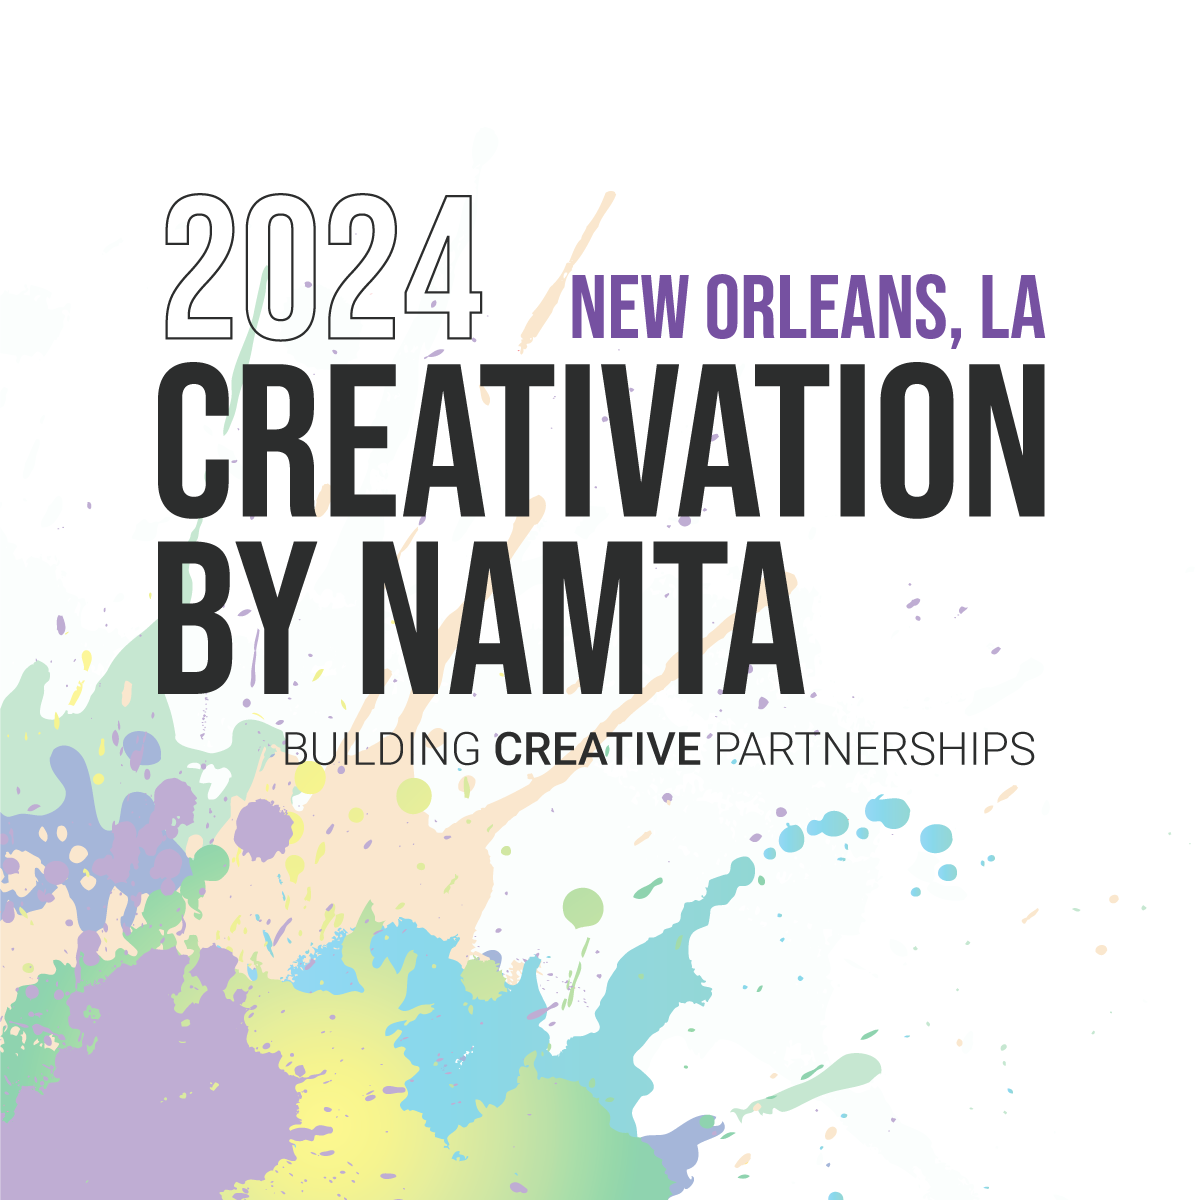 Save the Date: Chibitronics is Presenting at the Creativation by NAMTA Trade Show!